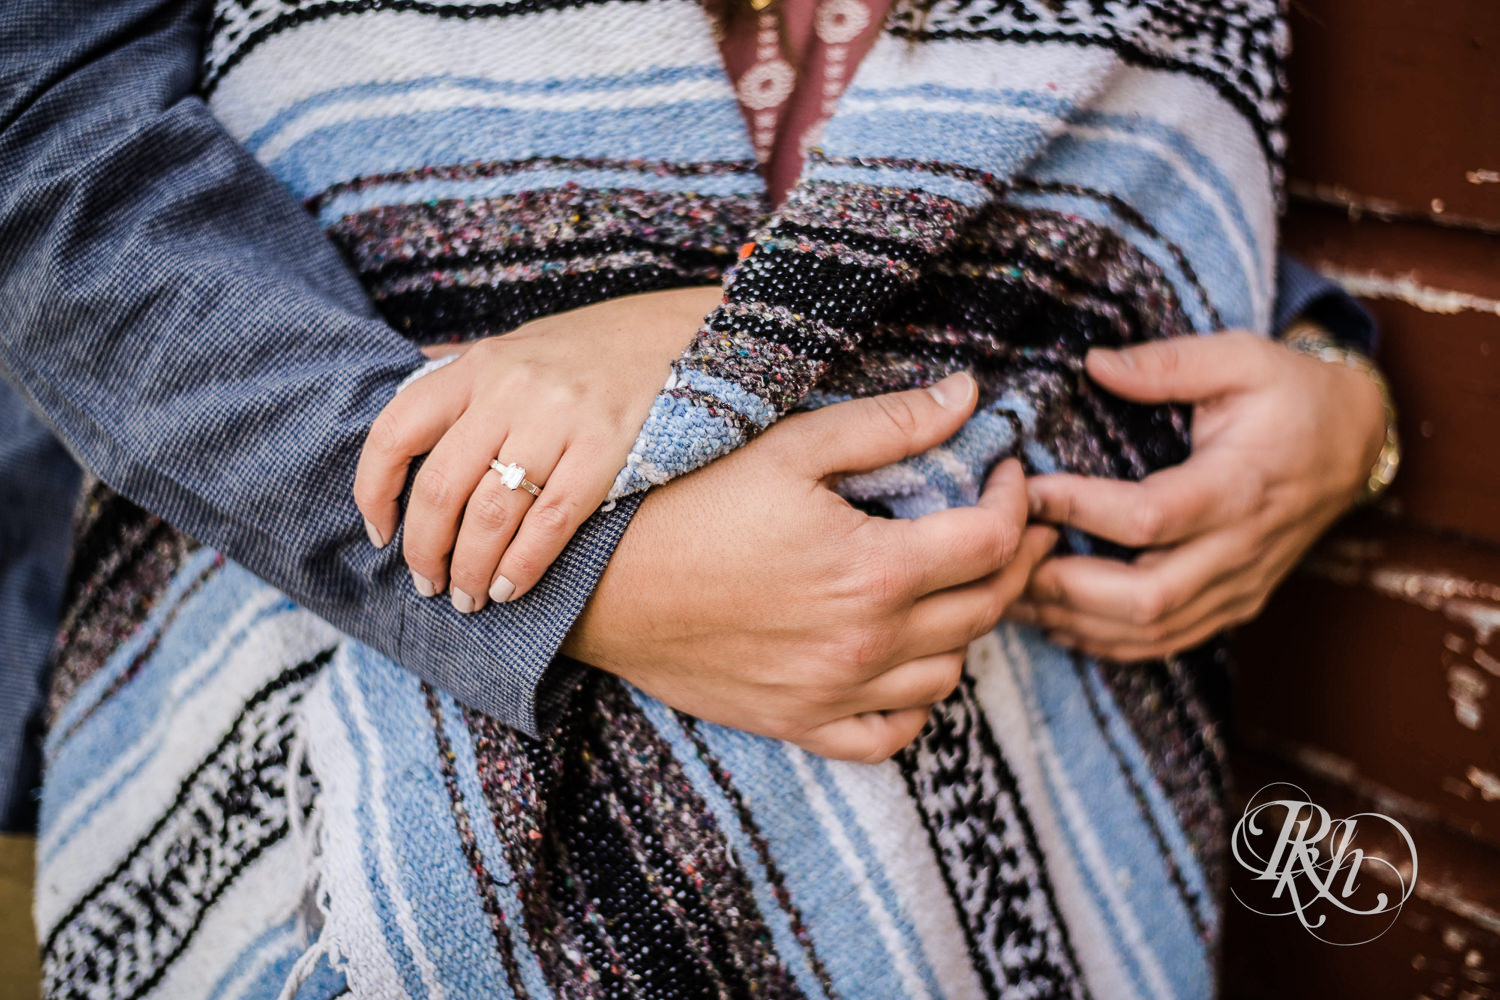 Man and woman snuggle in blanket showing engagement ring.